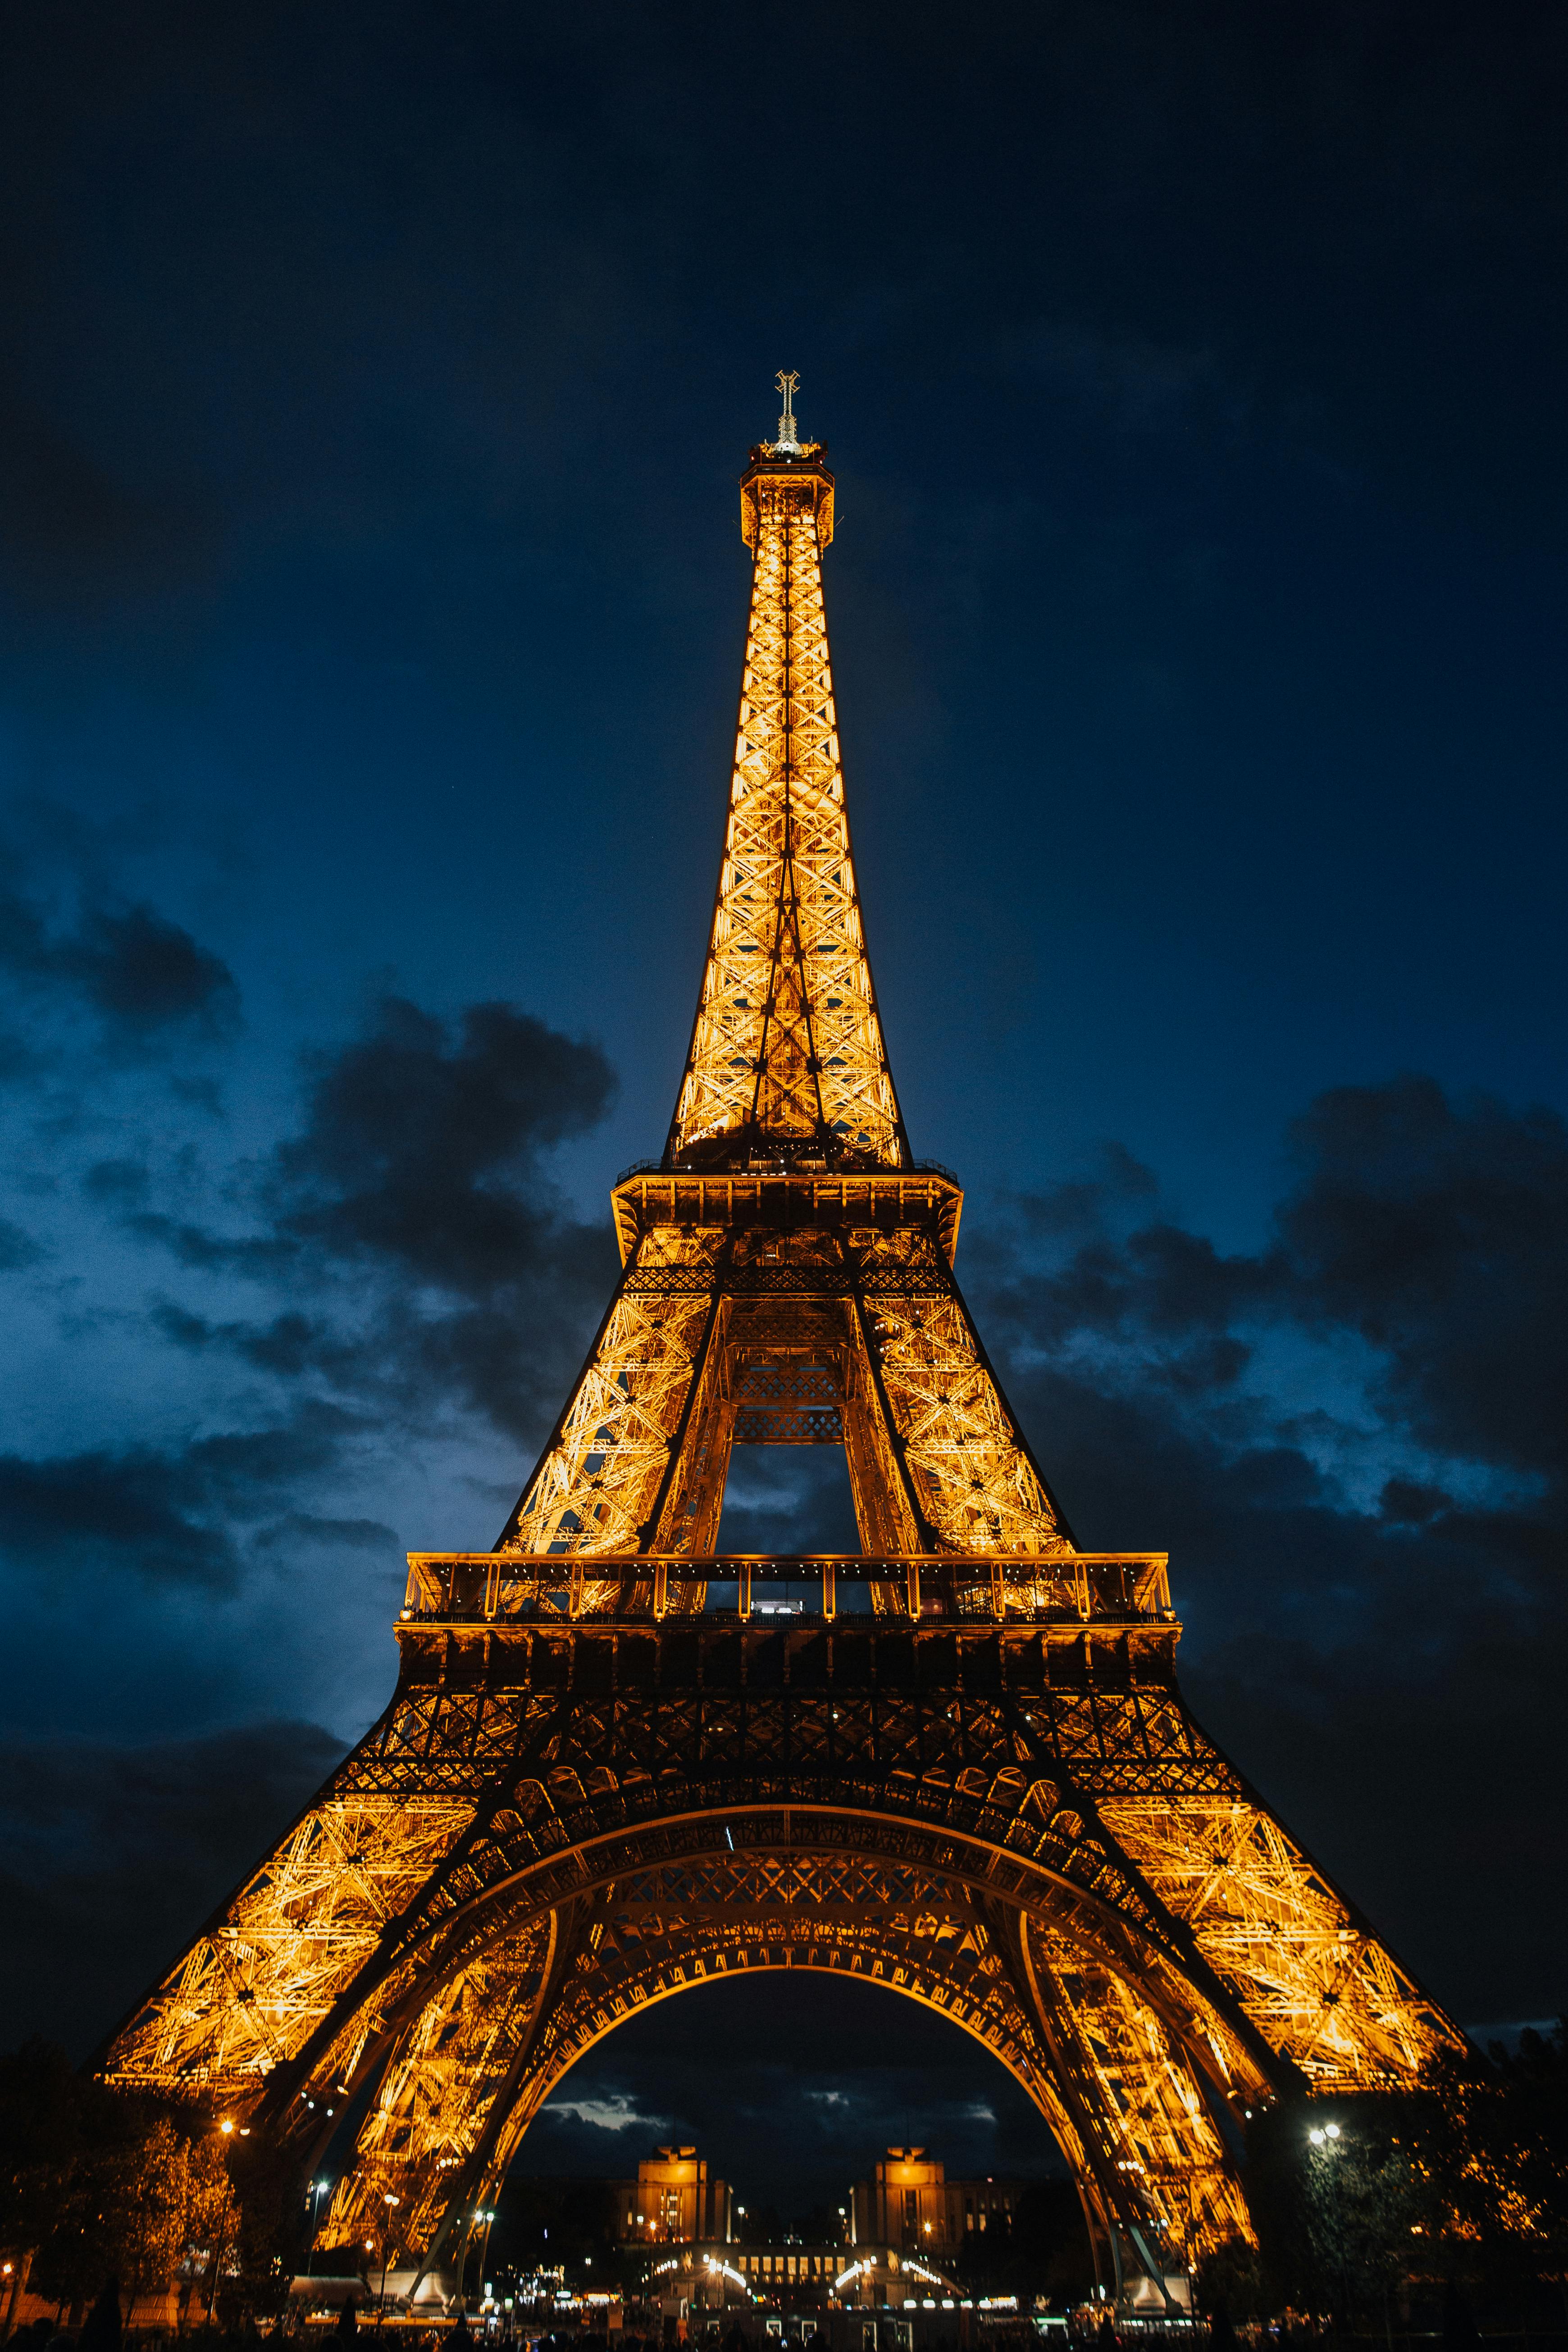 Low Angle Shot Of The Eiffel Tower With Illuminated Light At Night ...